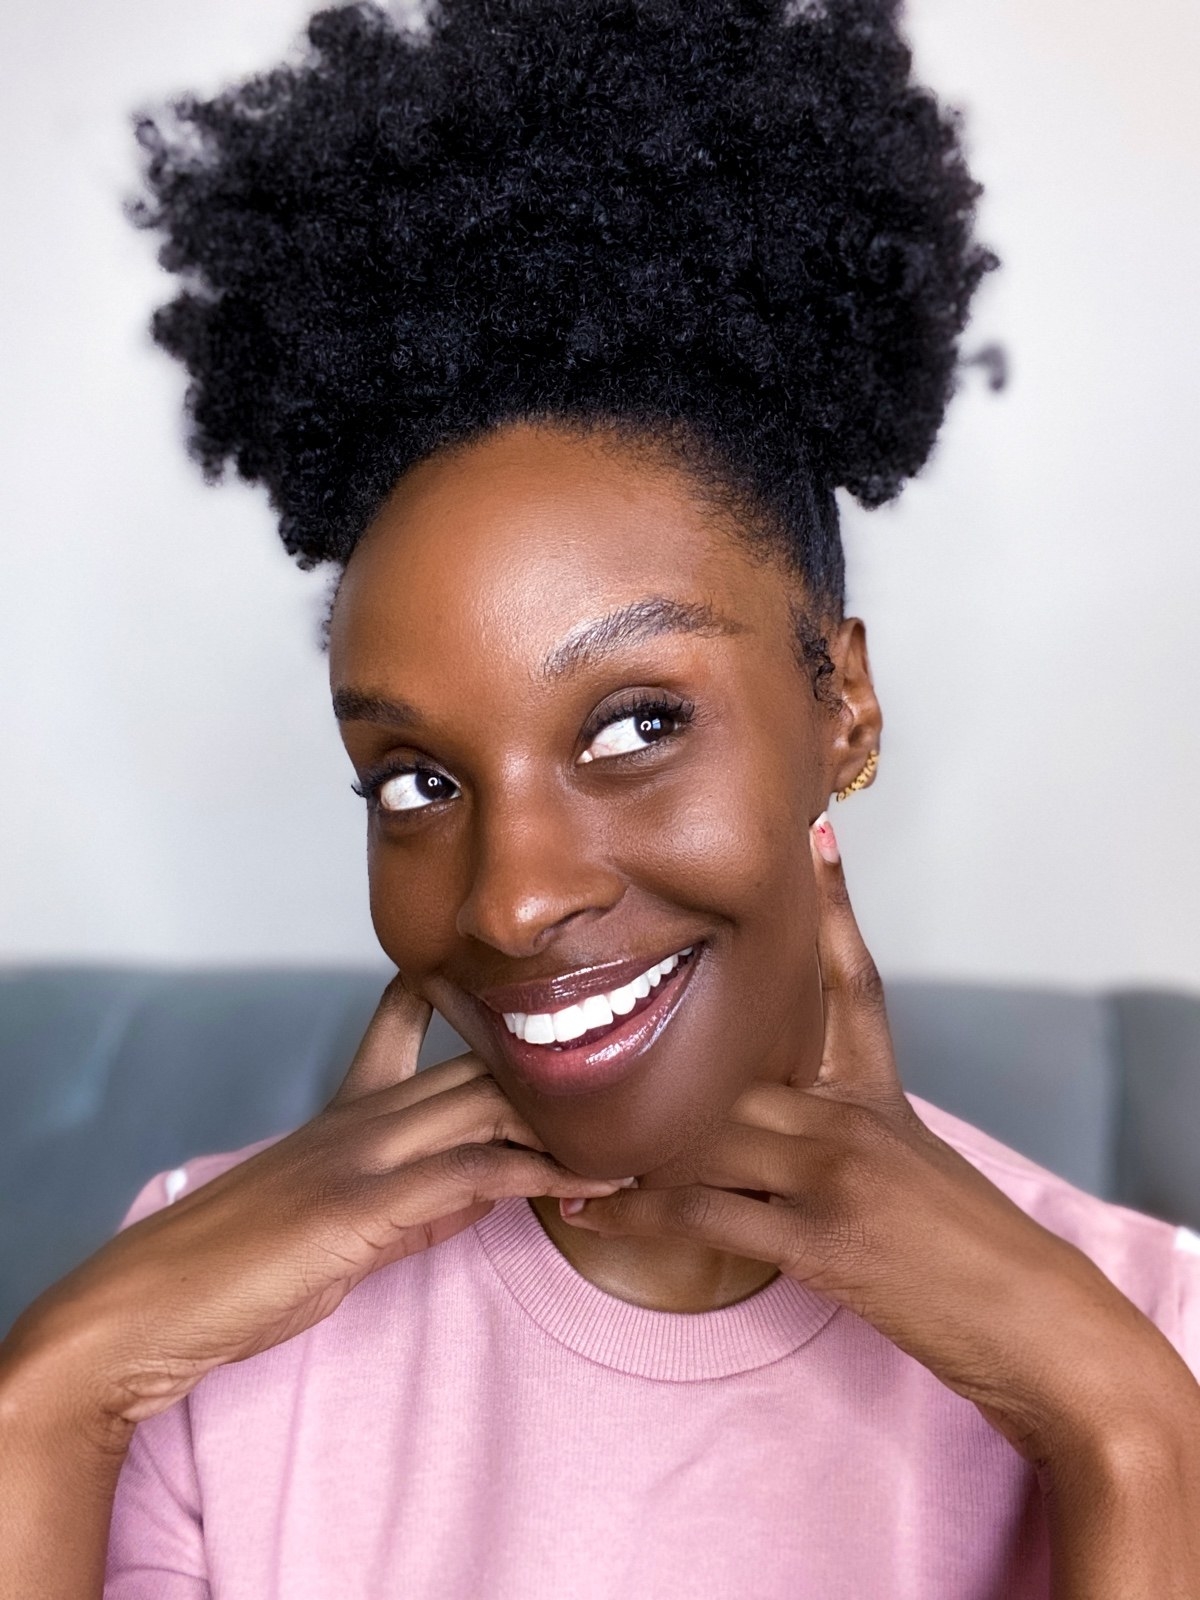 Essence smiles with fresh, glowing skin after completing her new Function of Beauty customizable skincare.